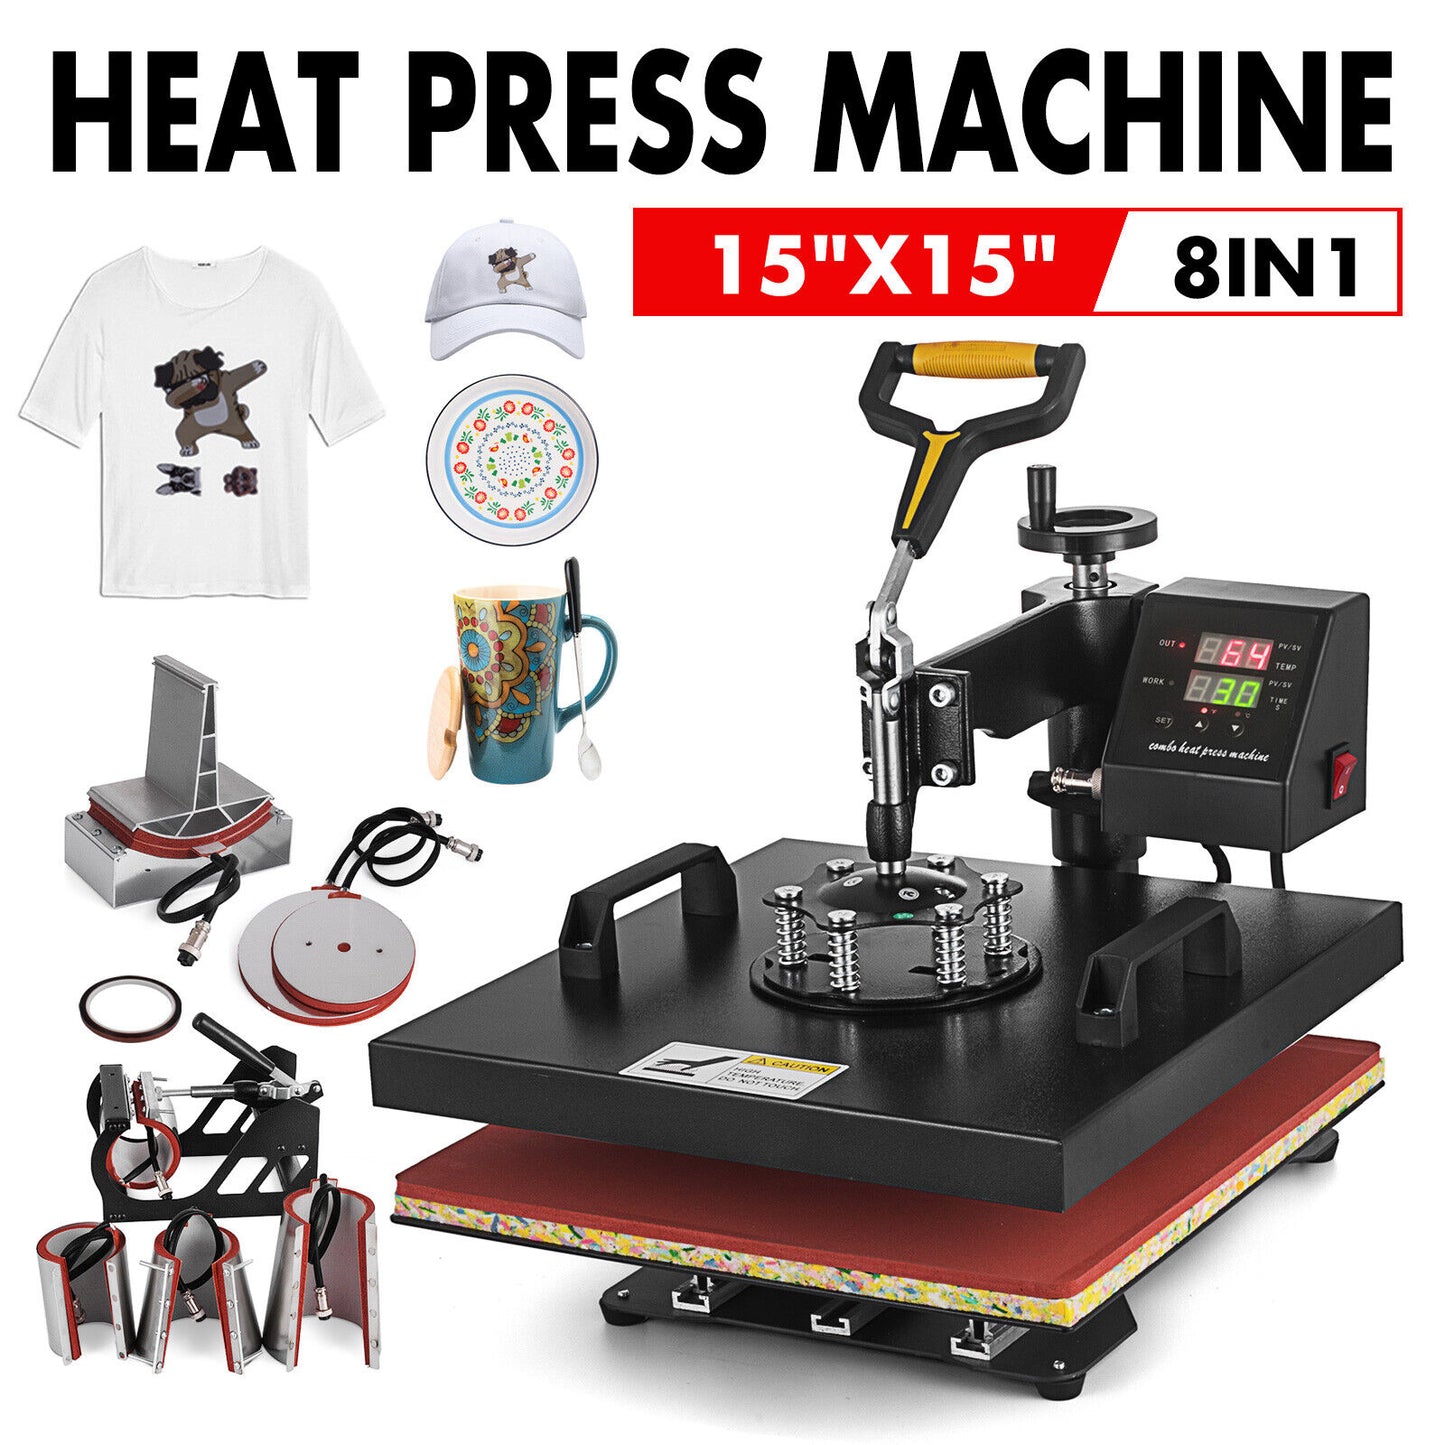 Combo T-Shirt Heat Press Printing Machine 15"x15" 8 IN 1 Sublimation Swing Away